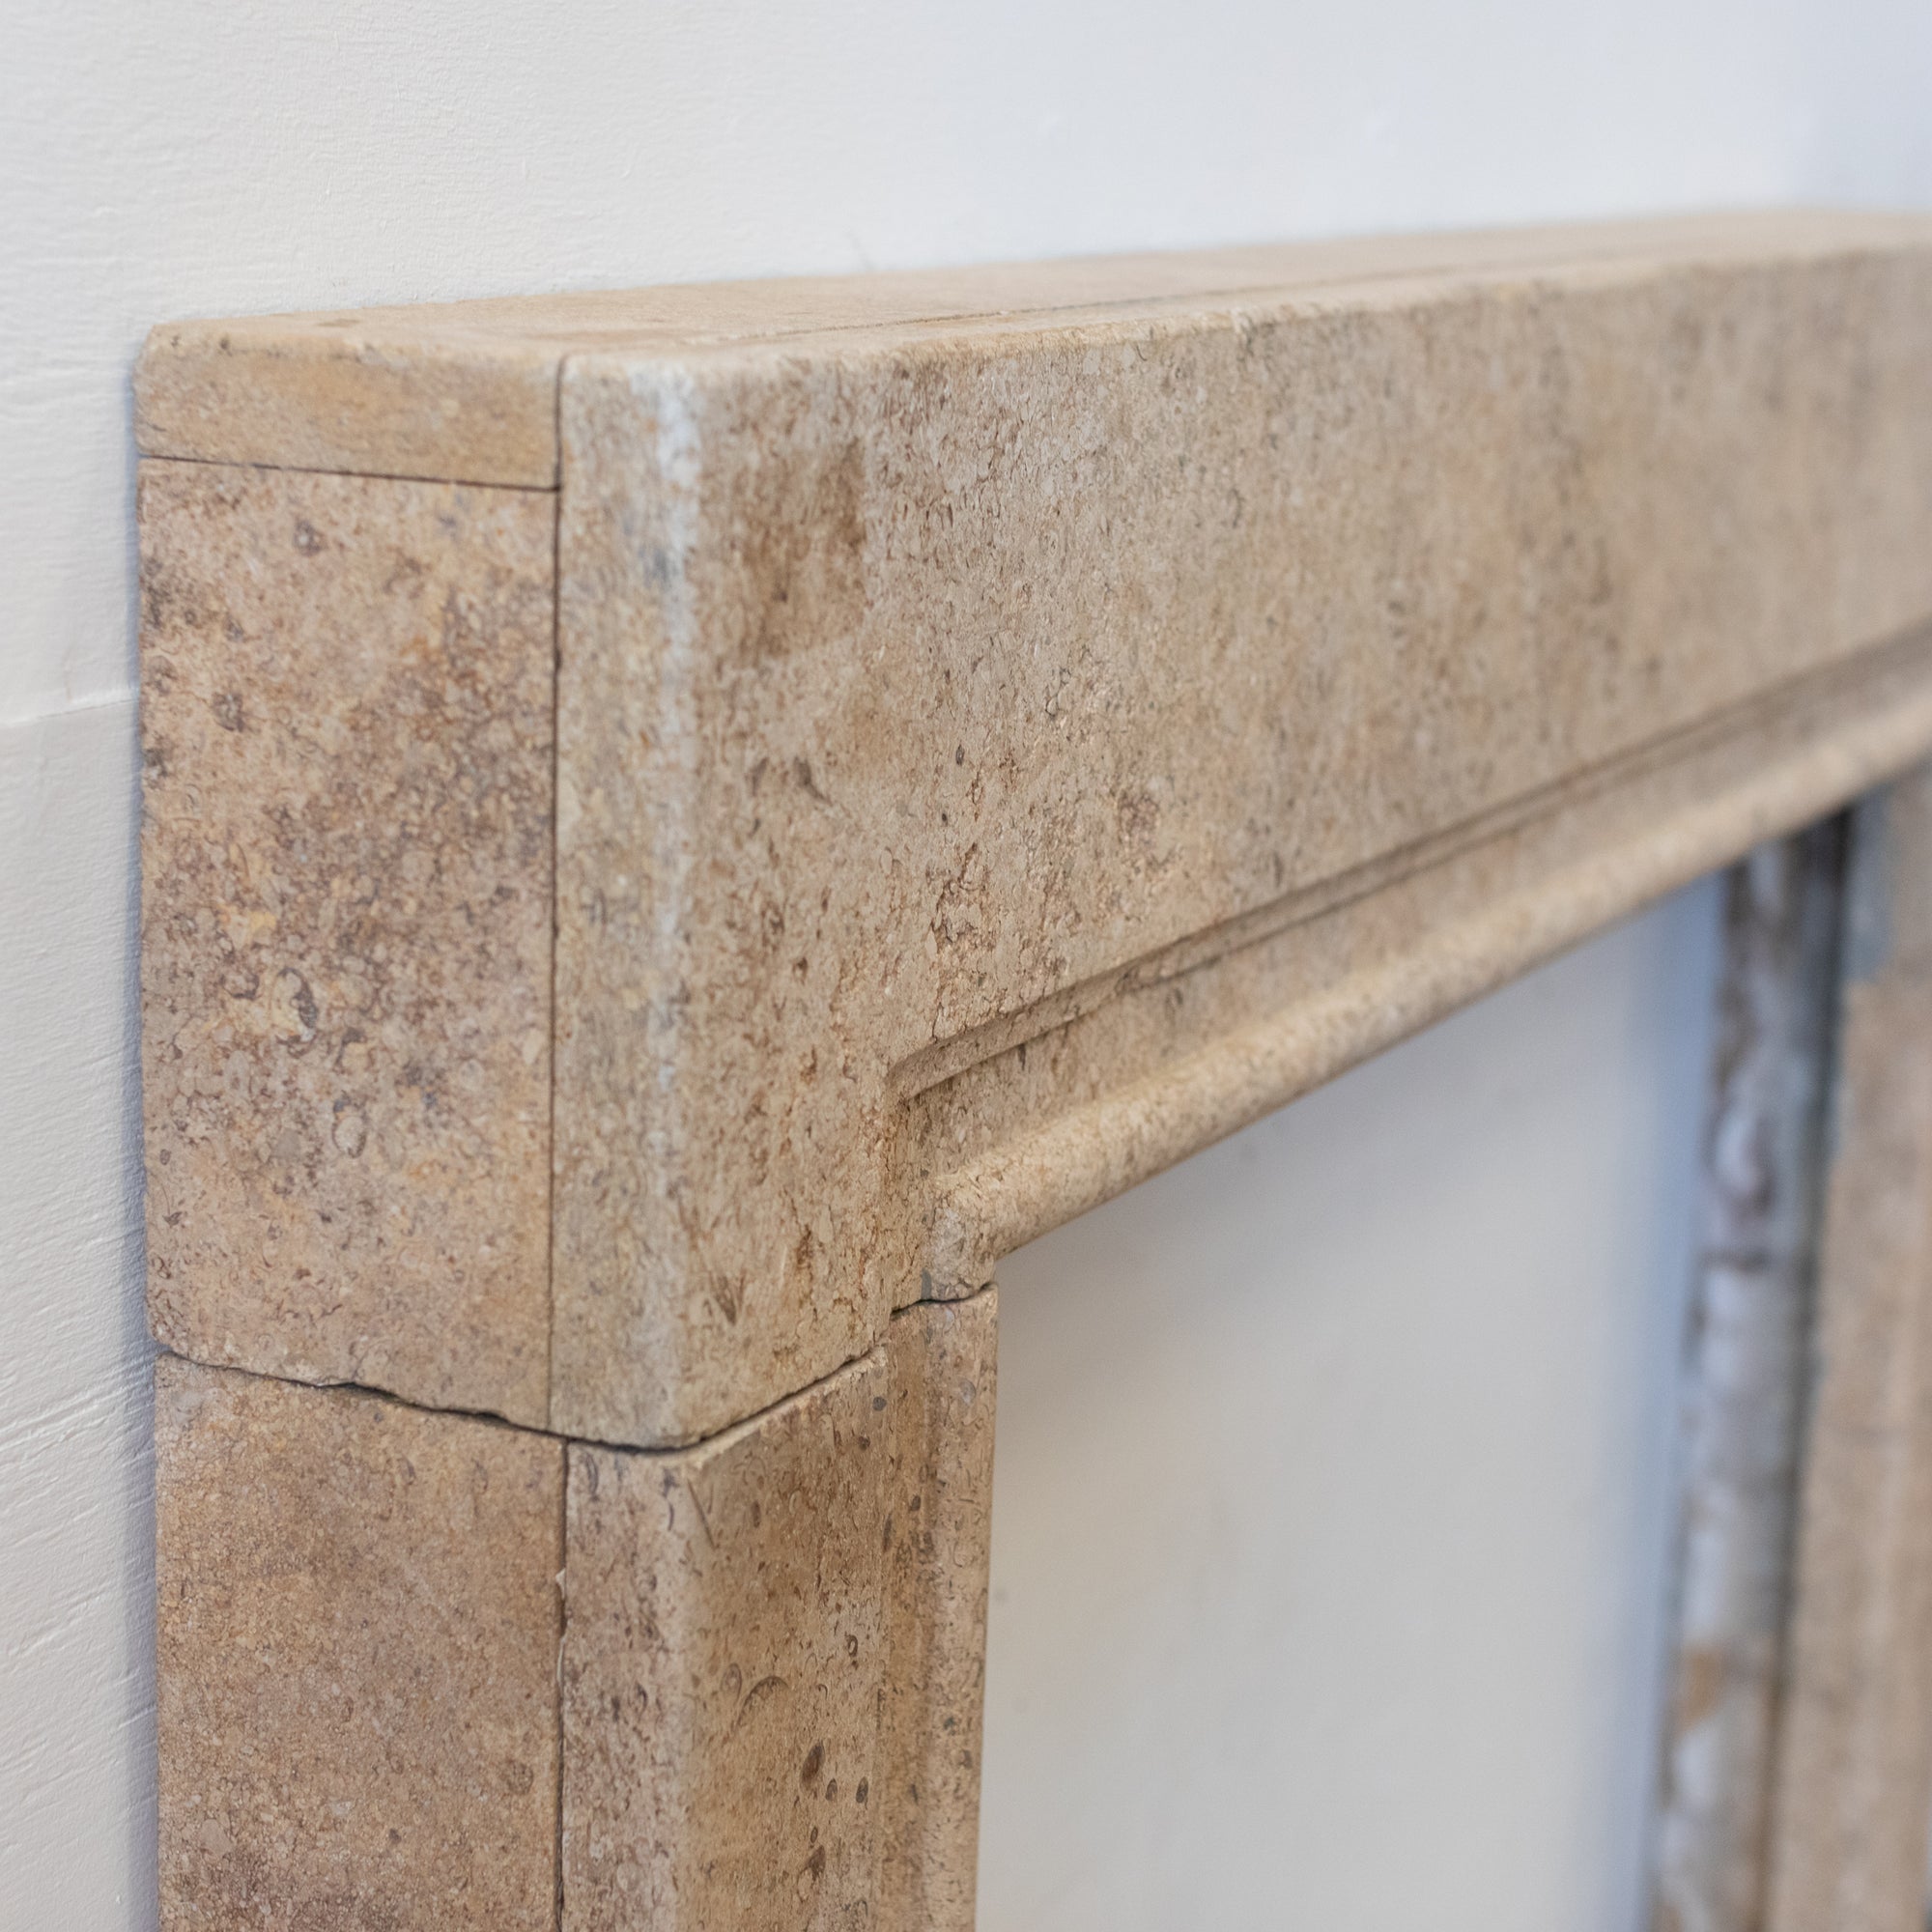 Reclaimed Antque Art Deco Stone Bolection Fireplace Surround | The Architectural Forum